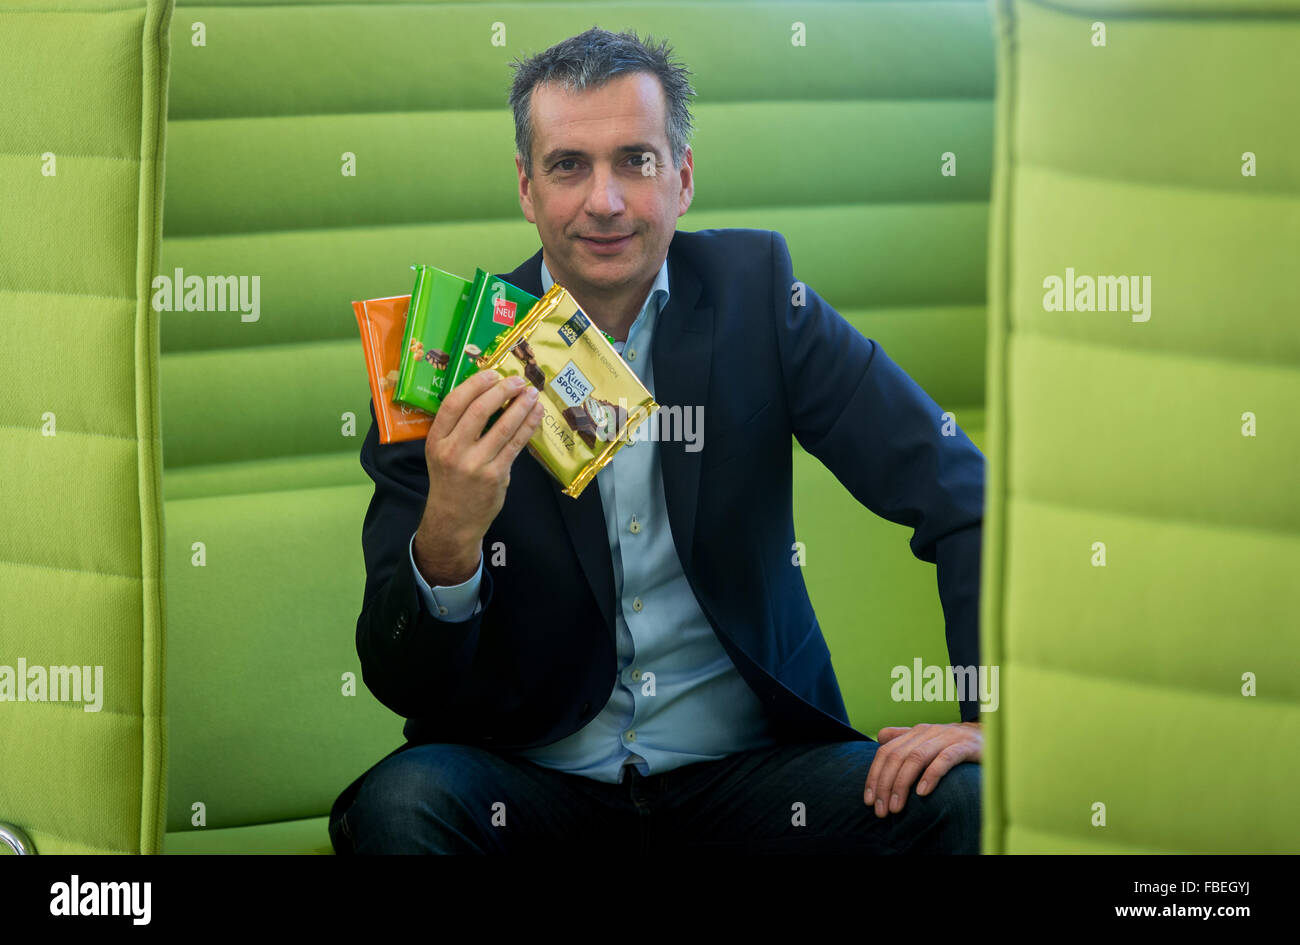 Chairman of the management board of chocolate manufacturer Ritter Sport, Andreas Ronken, holds chocolate bars with different flavours in his hand at the company headquarter in Waldenbuch, Germany, 8 December 2015. Photo: Daniel Maurer/dpa Stock Photo